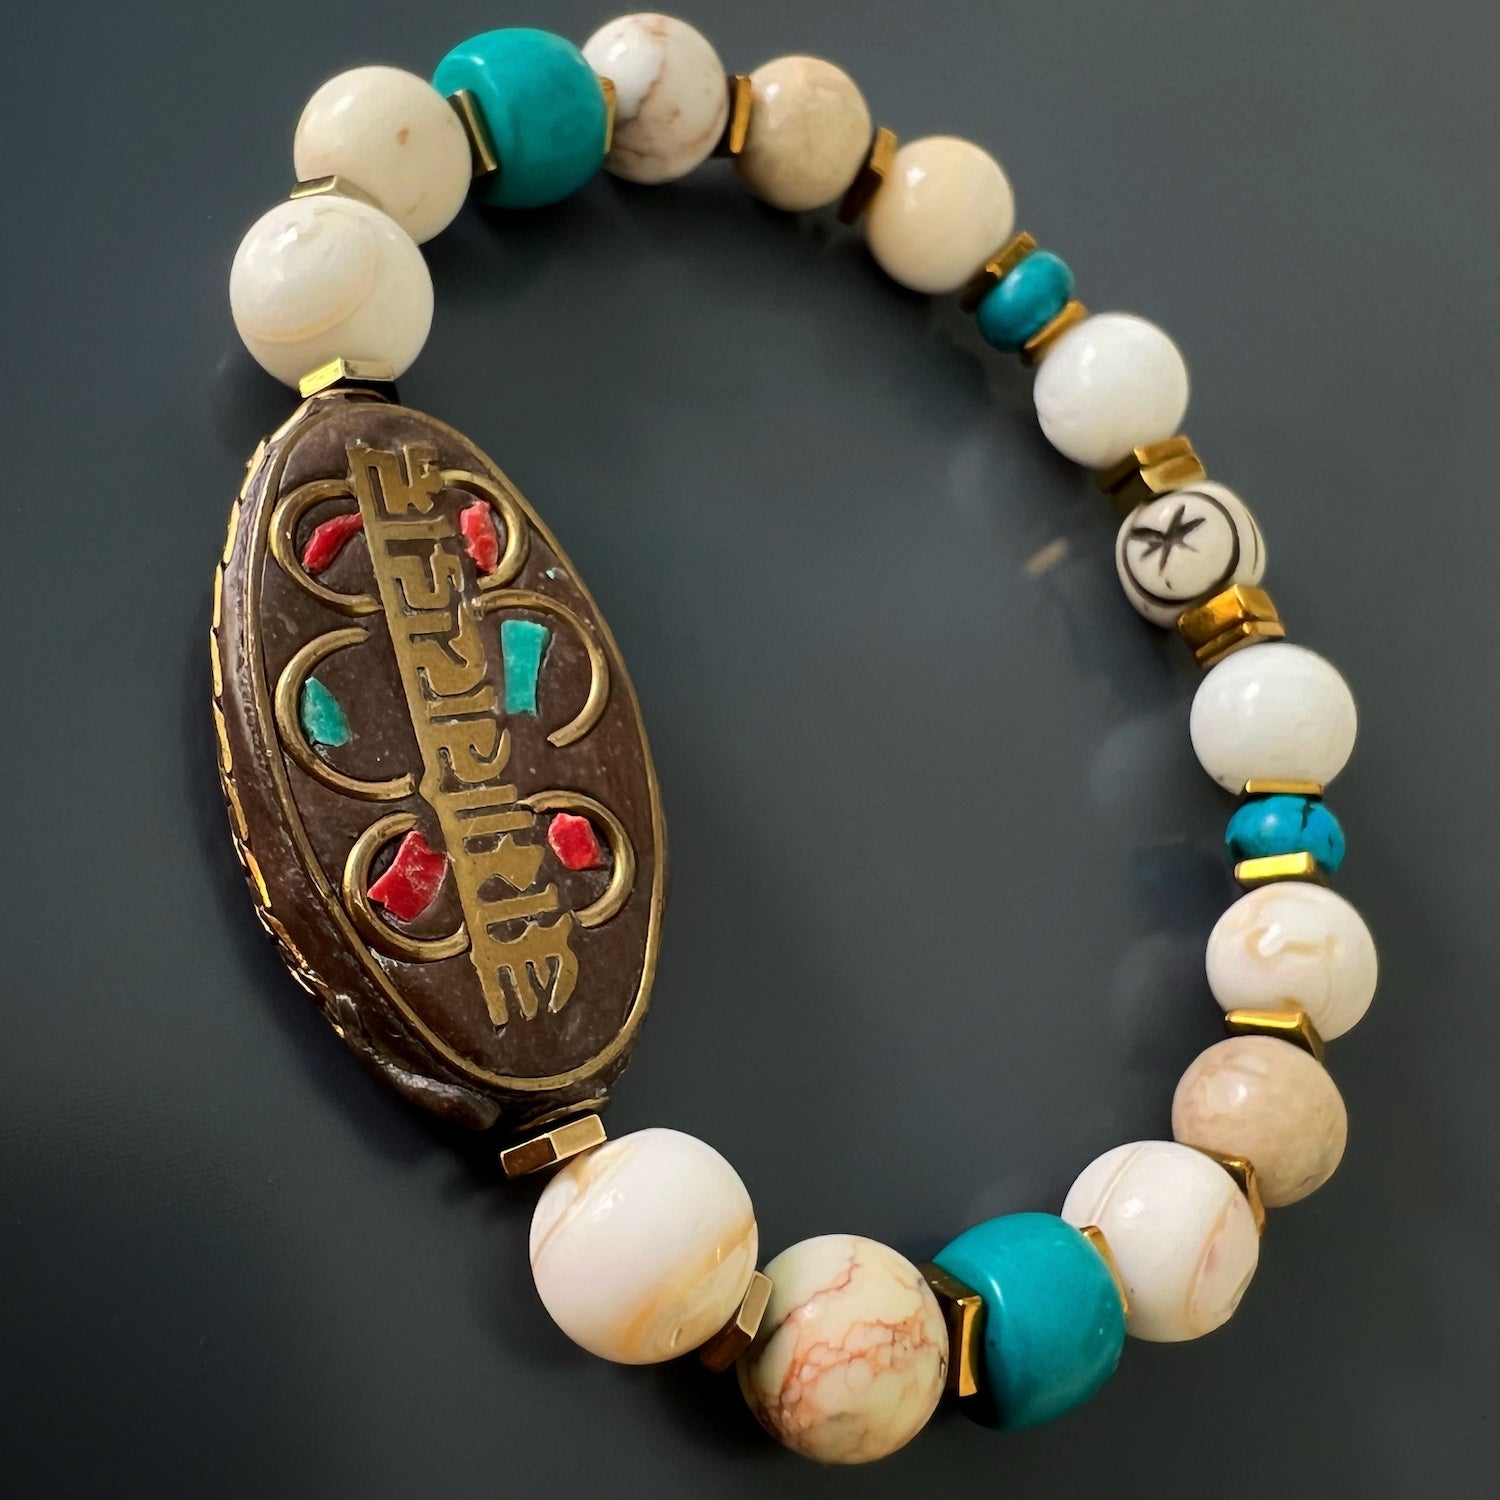 The Om Mani Padme Hum Nepal Bracelet combines beauty and spirituality, making it a unique and meaningful piece of jewelry.